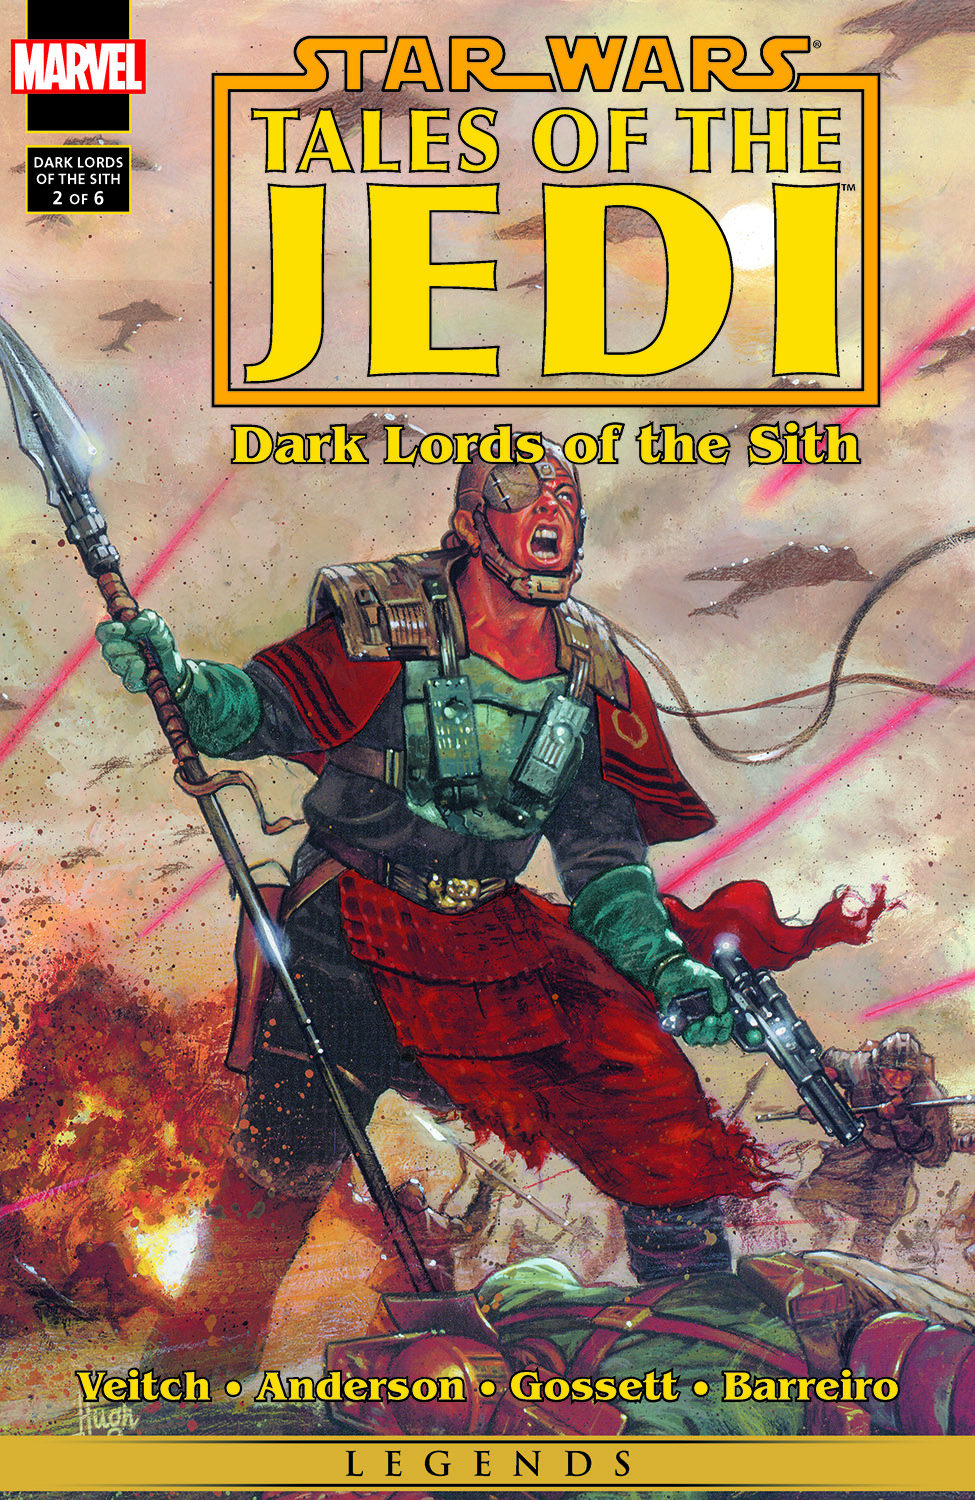 Star Wars: Tales of the Jedi - Dark Lords of the Sith (1994) #2